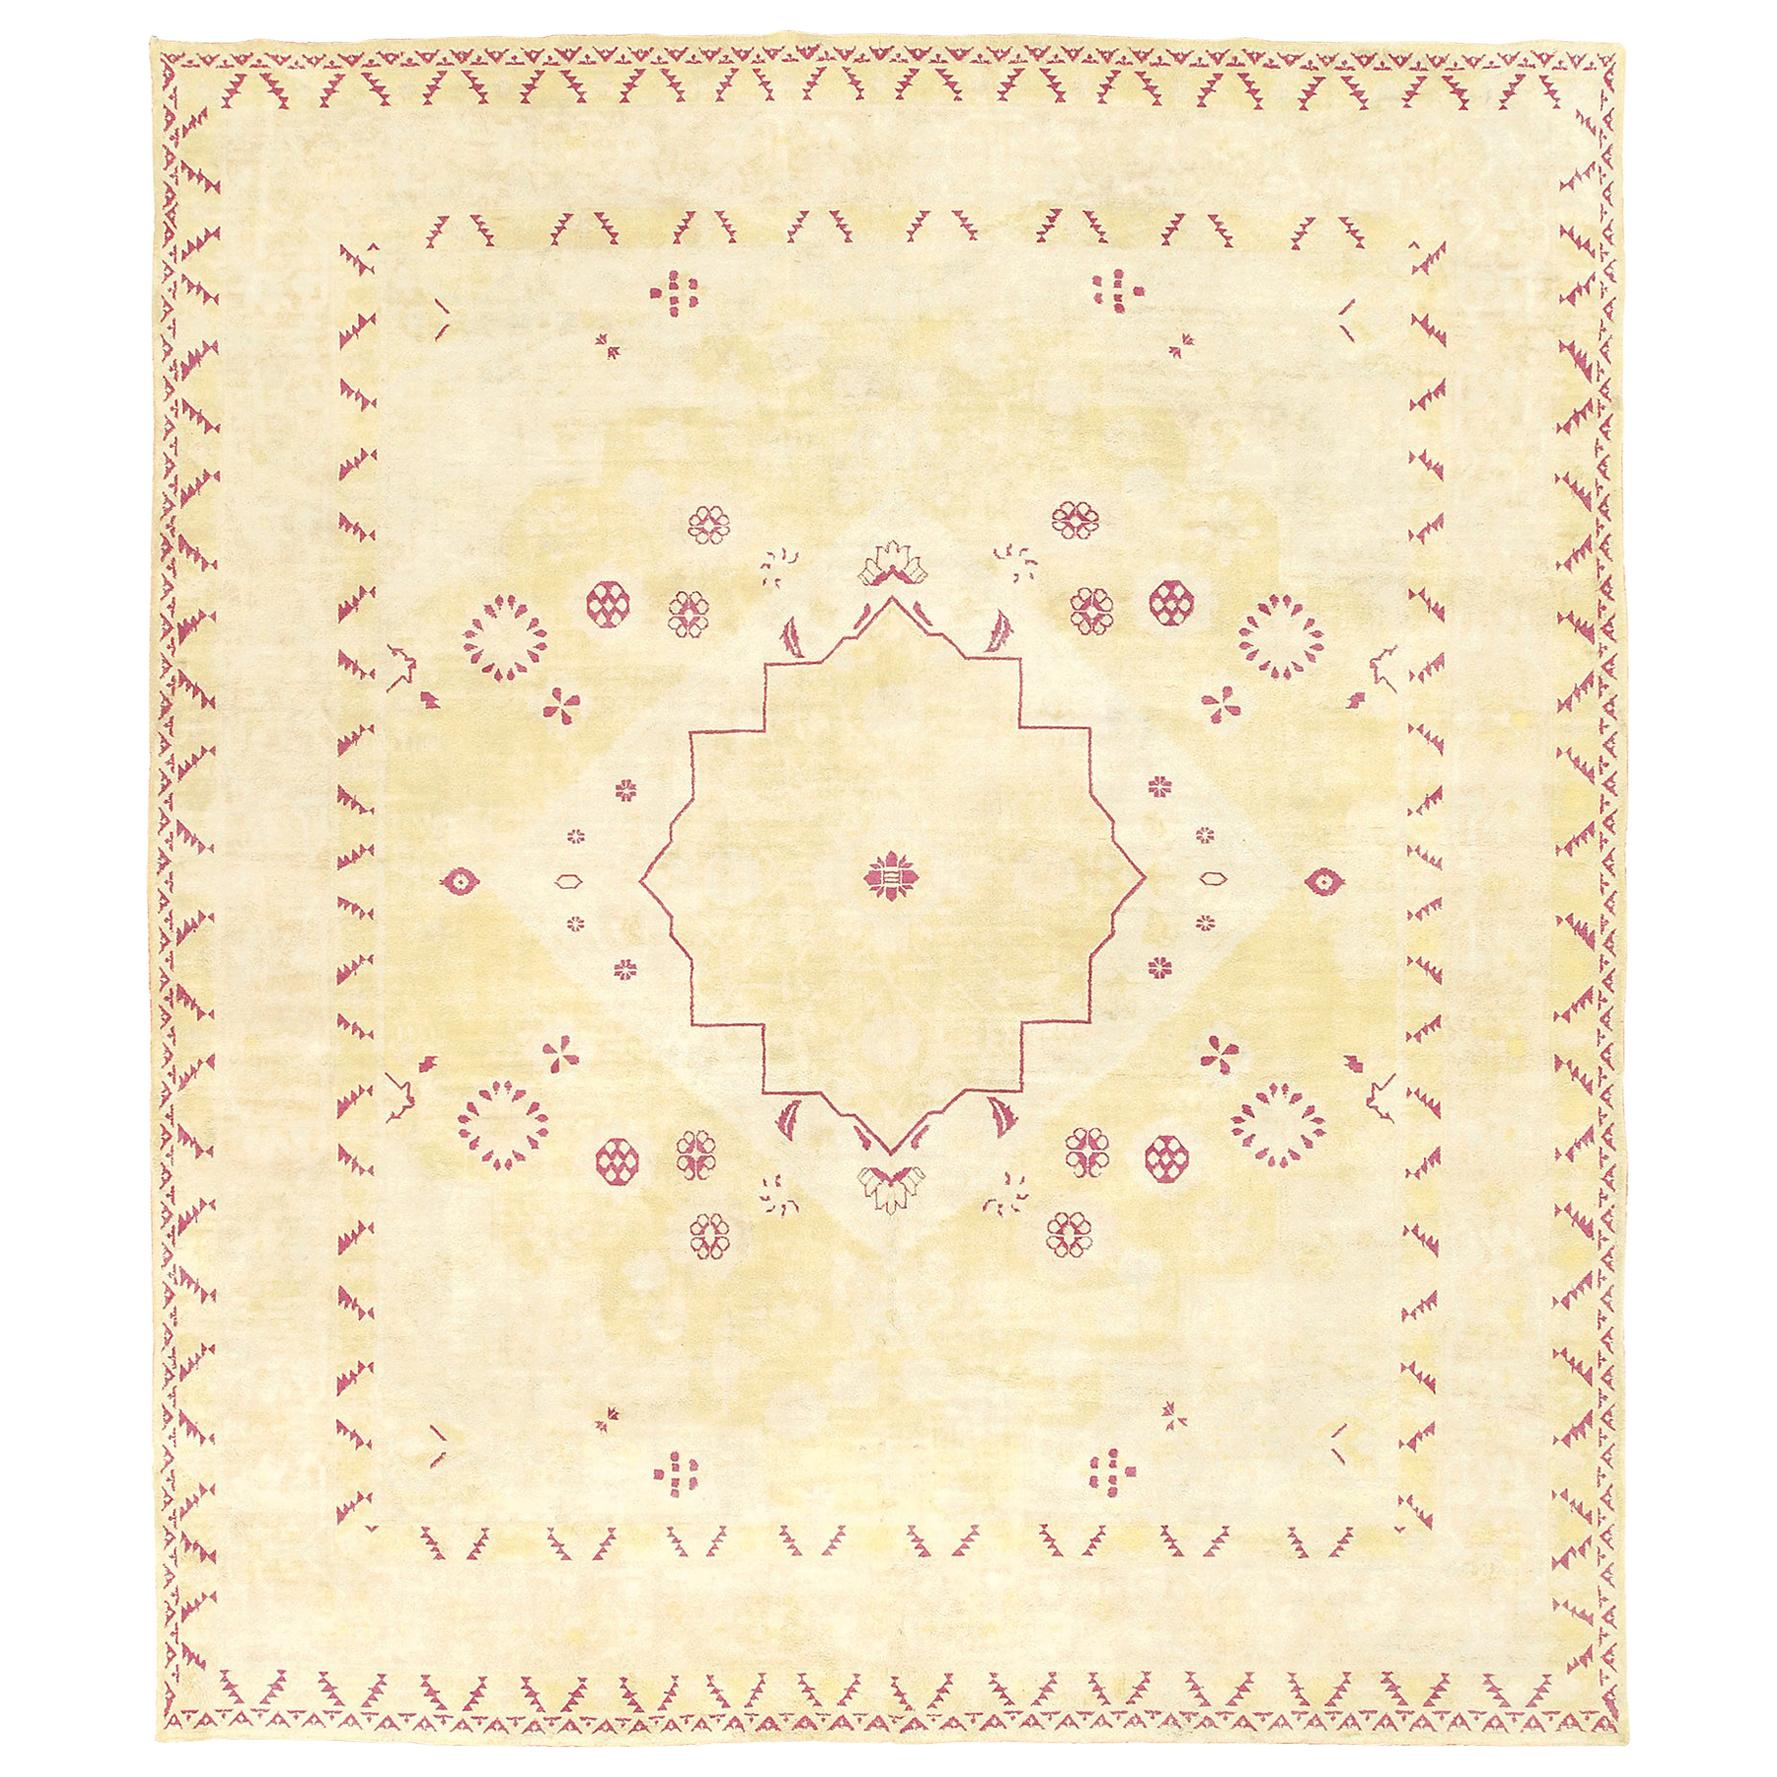 Early 20th Century Indian Agra Rug